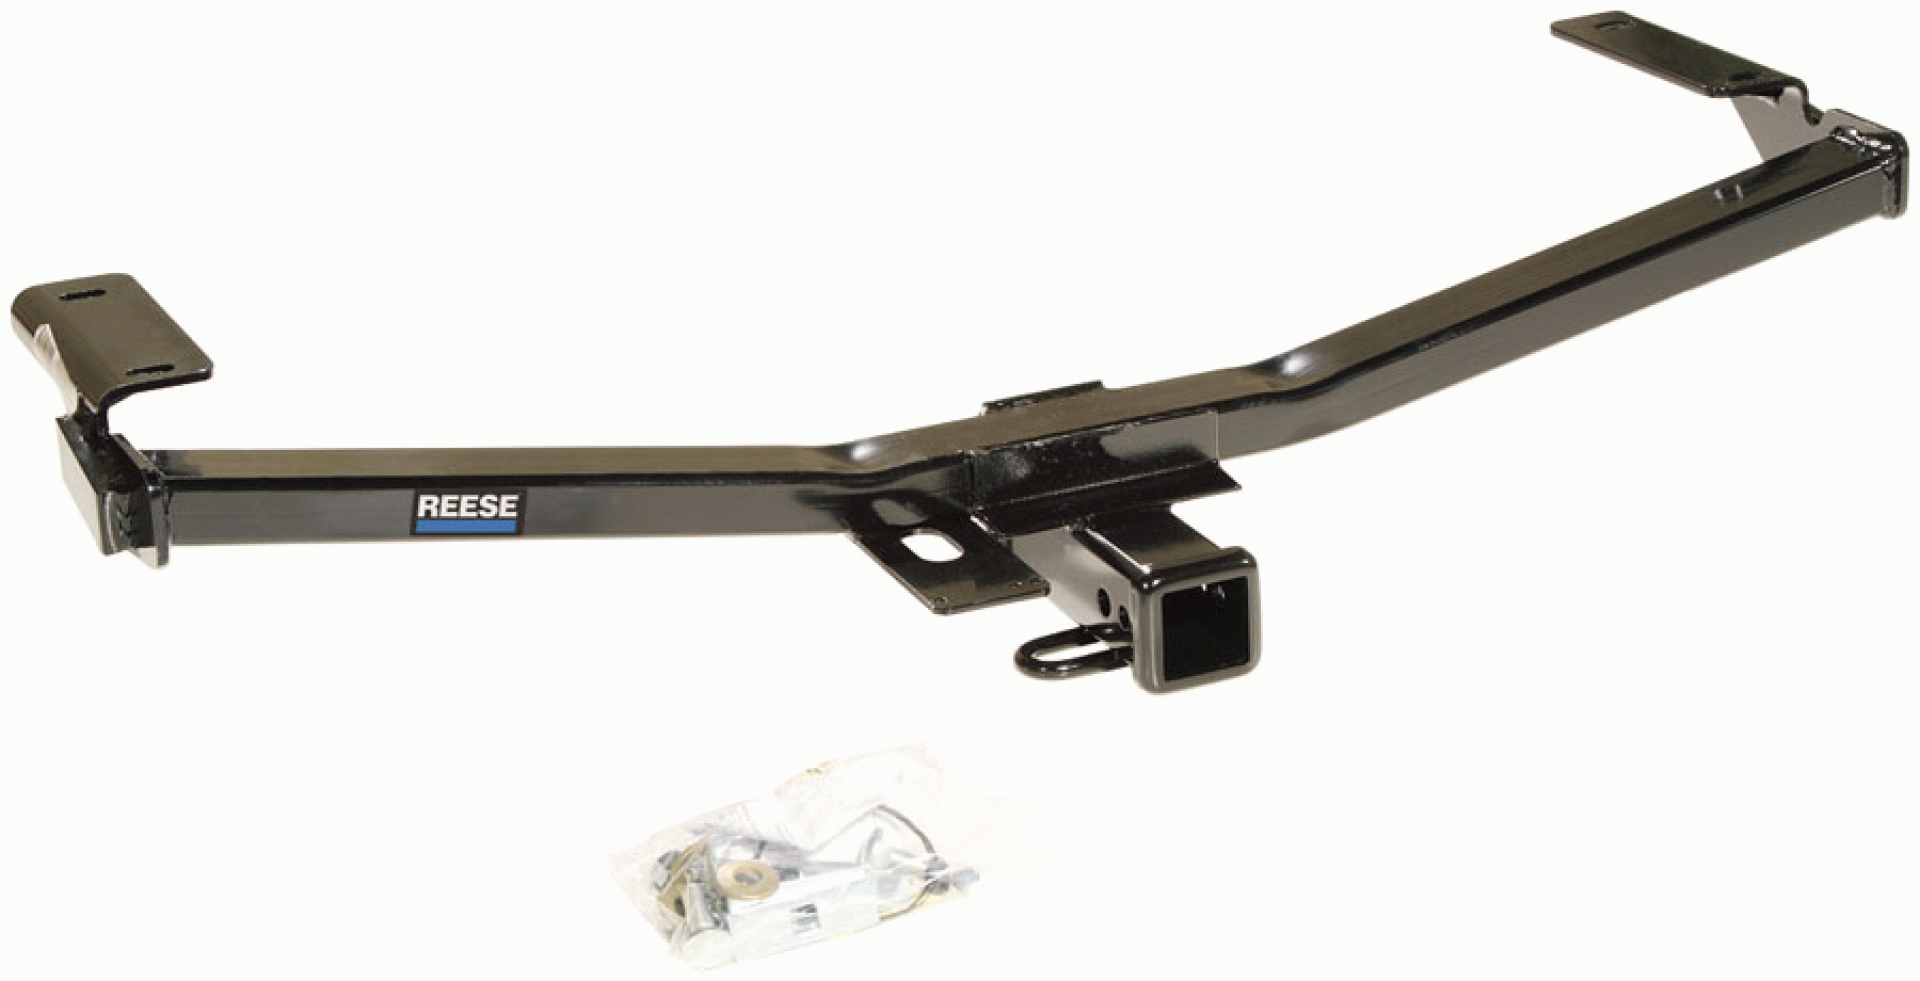 REESE | 44658 | HITCH CLASS III REQUIRES 2 INCH REMOVABLE DRAWBAR